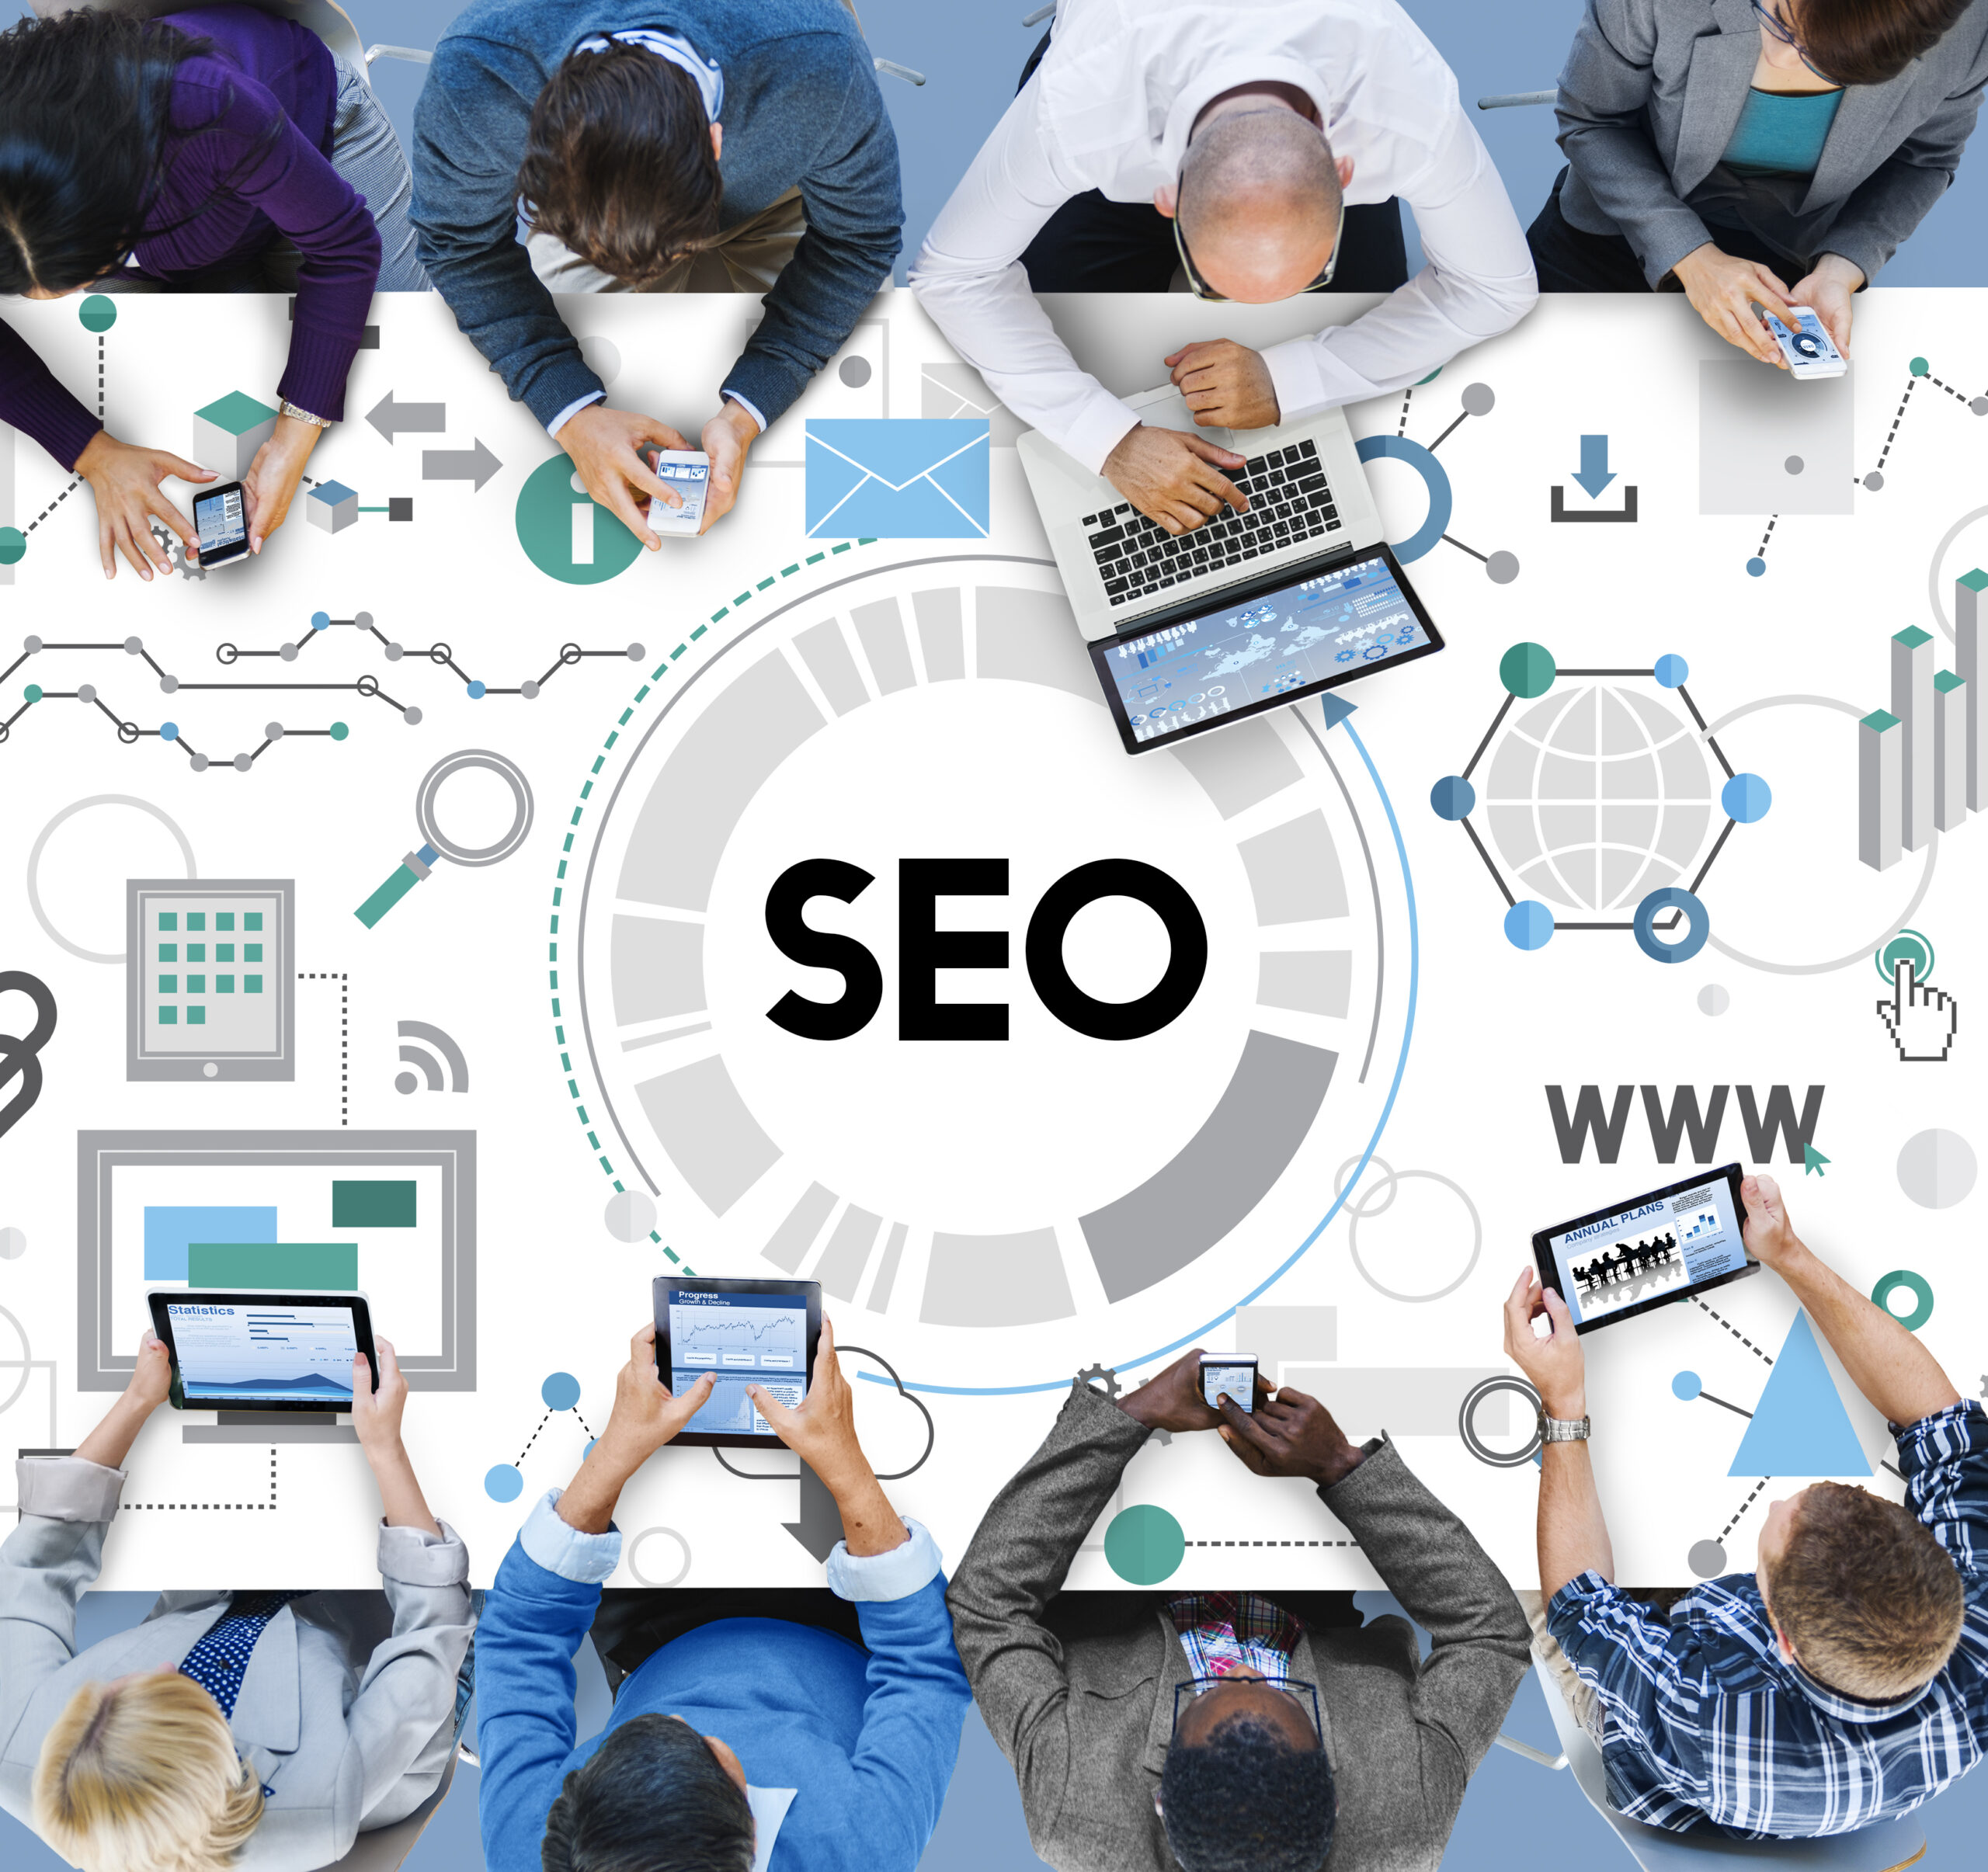 The Benefits of Investing in Professional SEO Services for Small Businesses